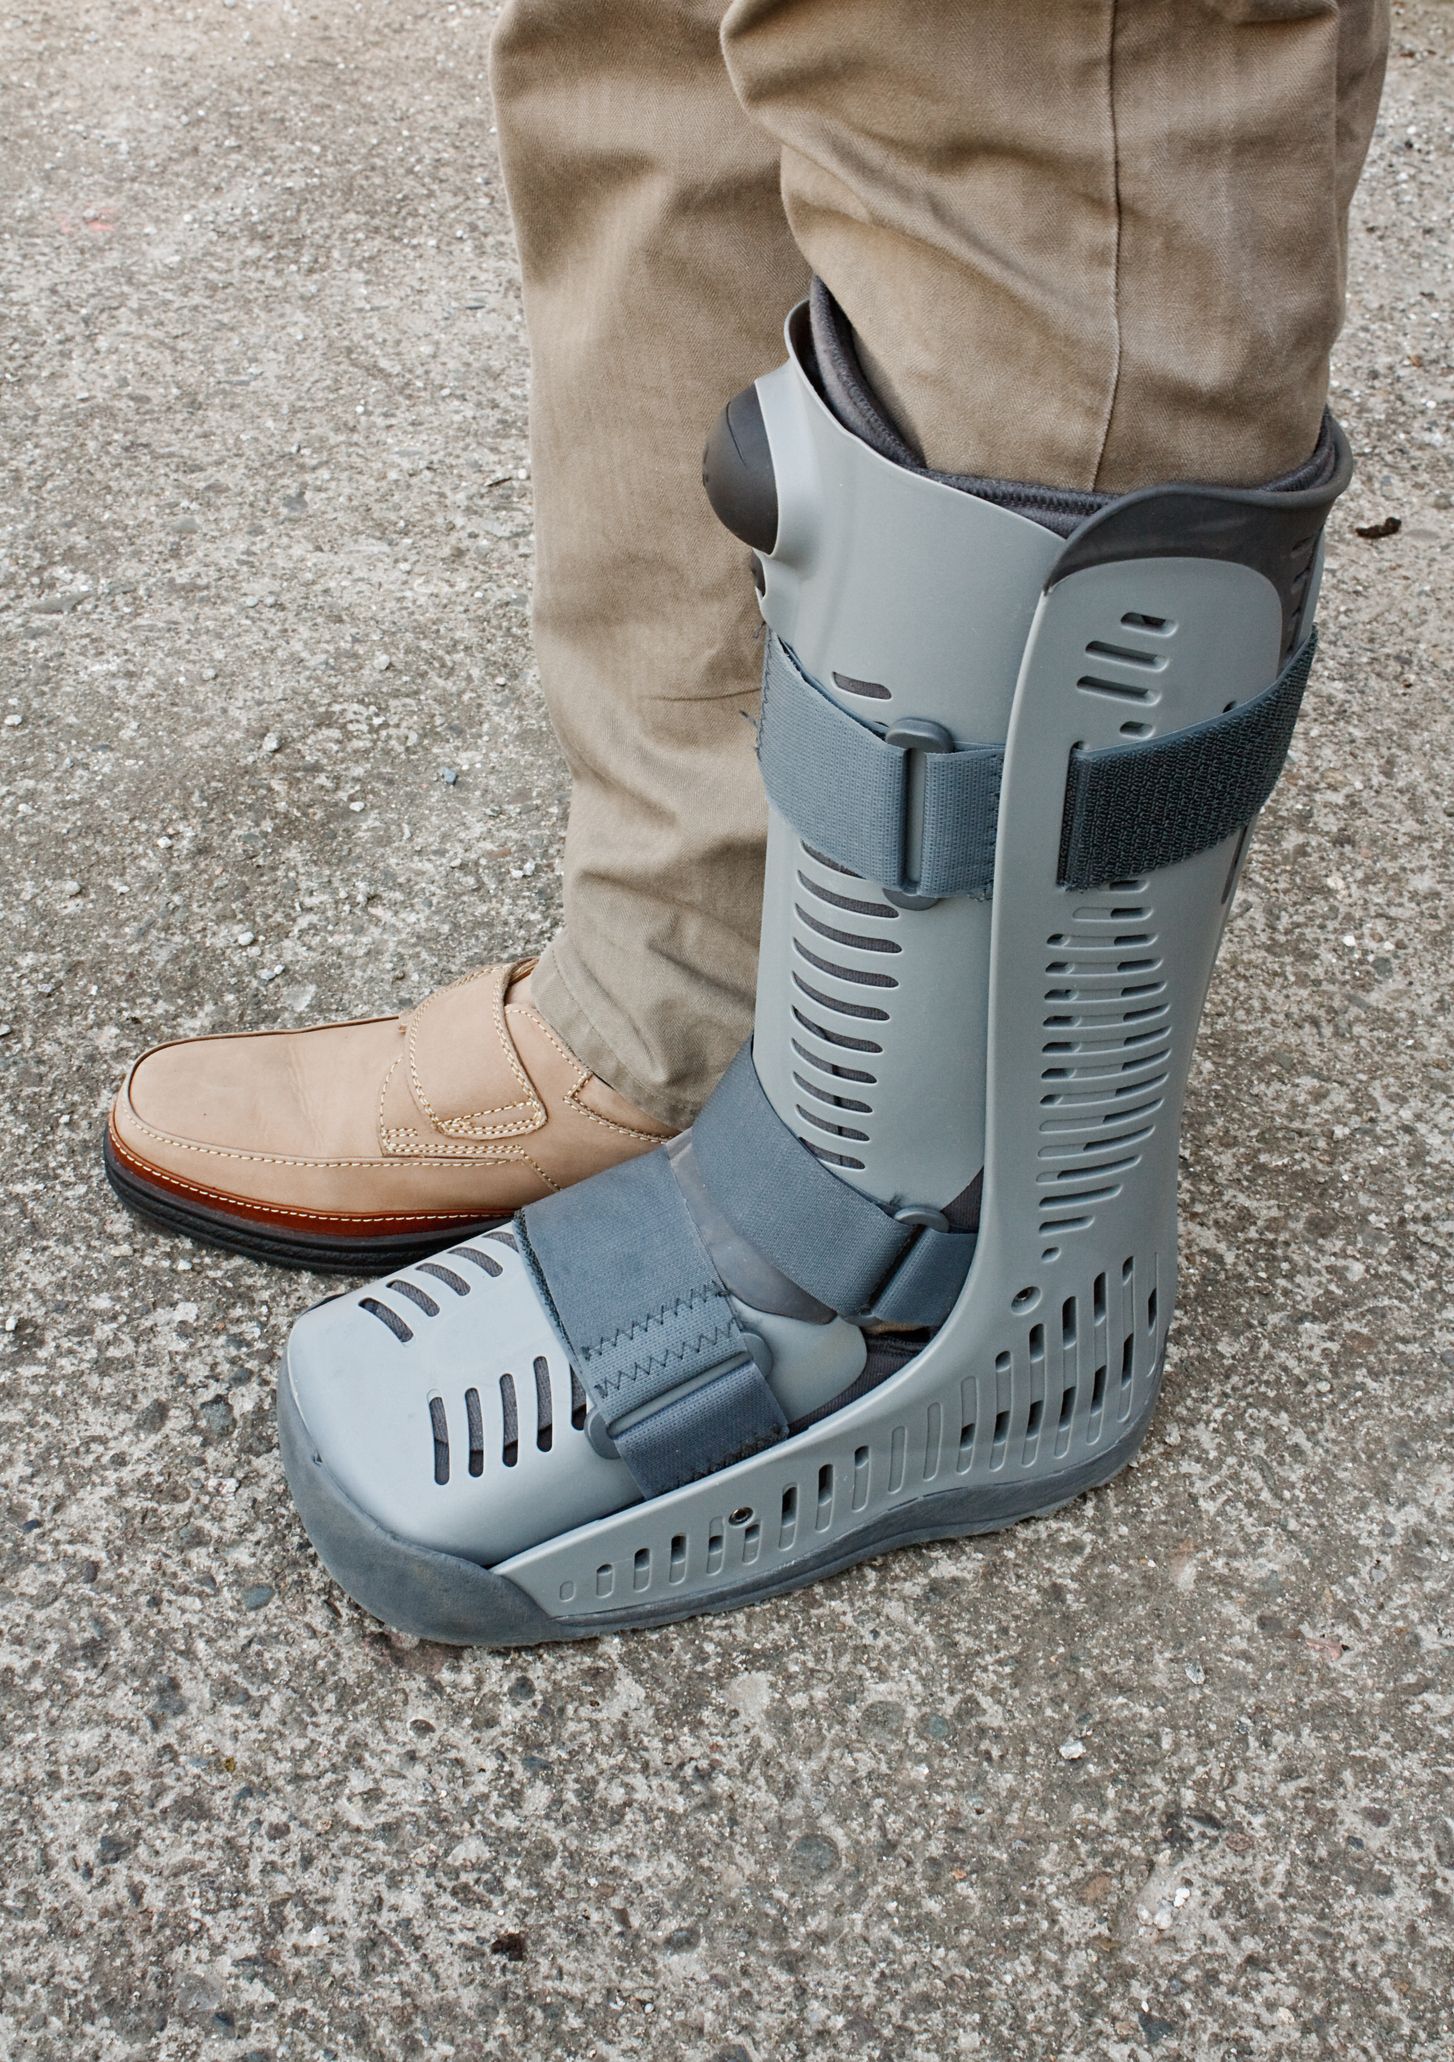 A man wears a large ankle boot while recovering from ankle replacement surgery.